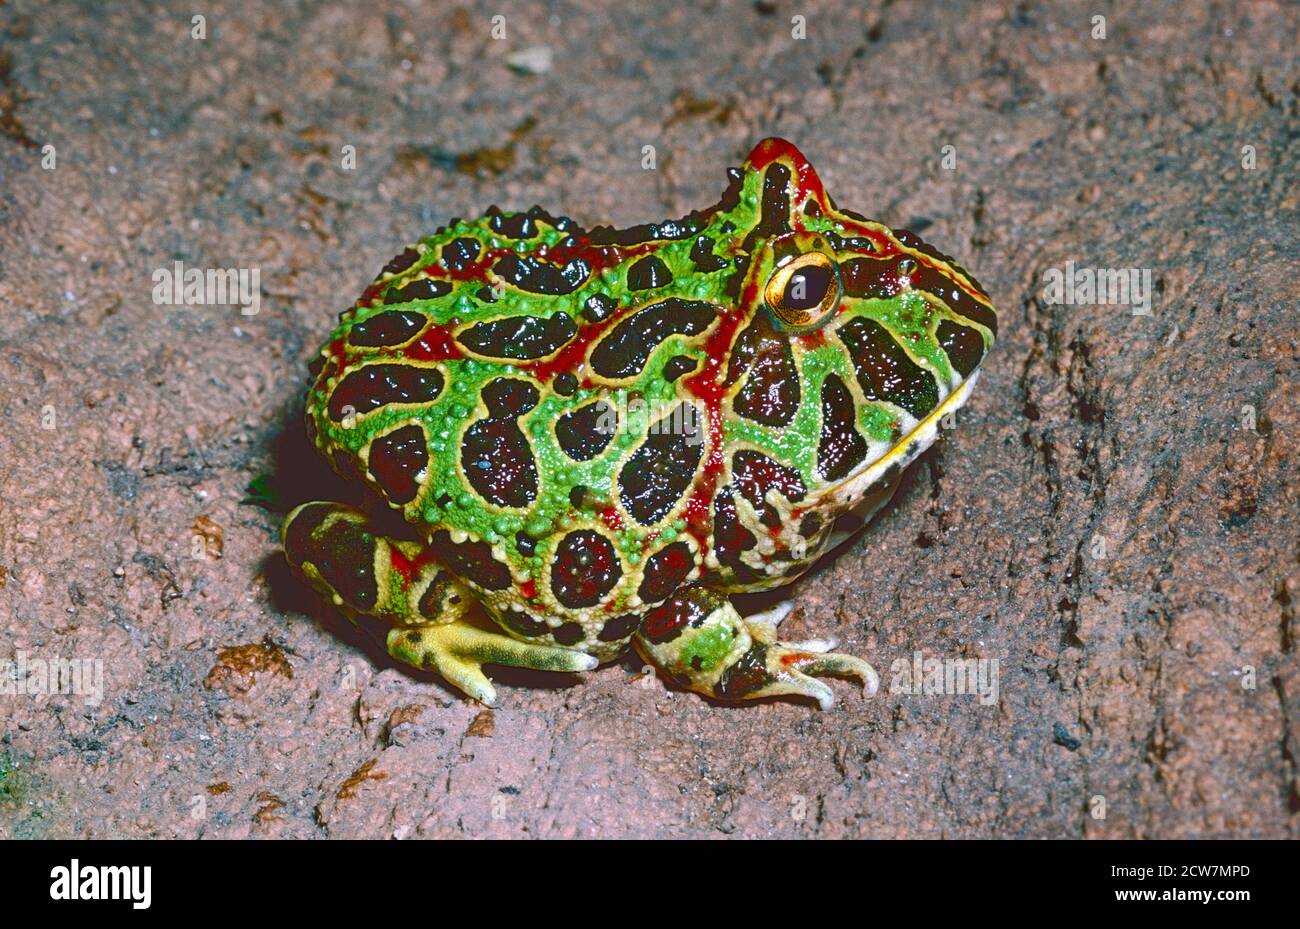 Young Argentine Horned Frog or Painted Escuerzo,  (Ceratophrys ornata,) from  Argentina, Brazil and Uruguay. Stock Photo